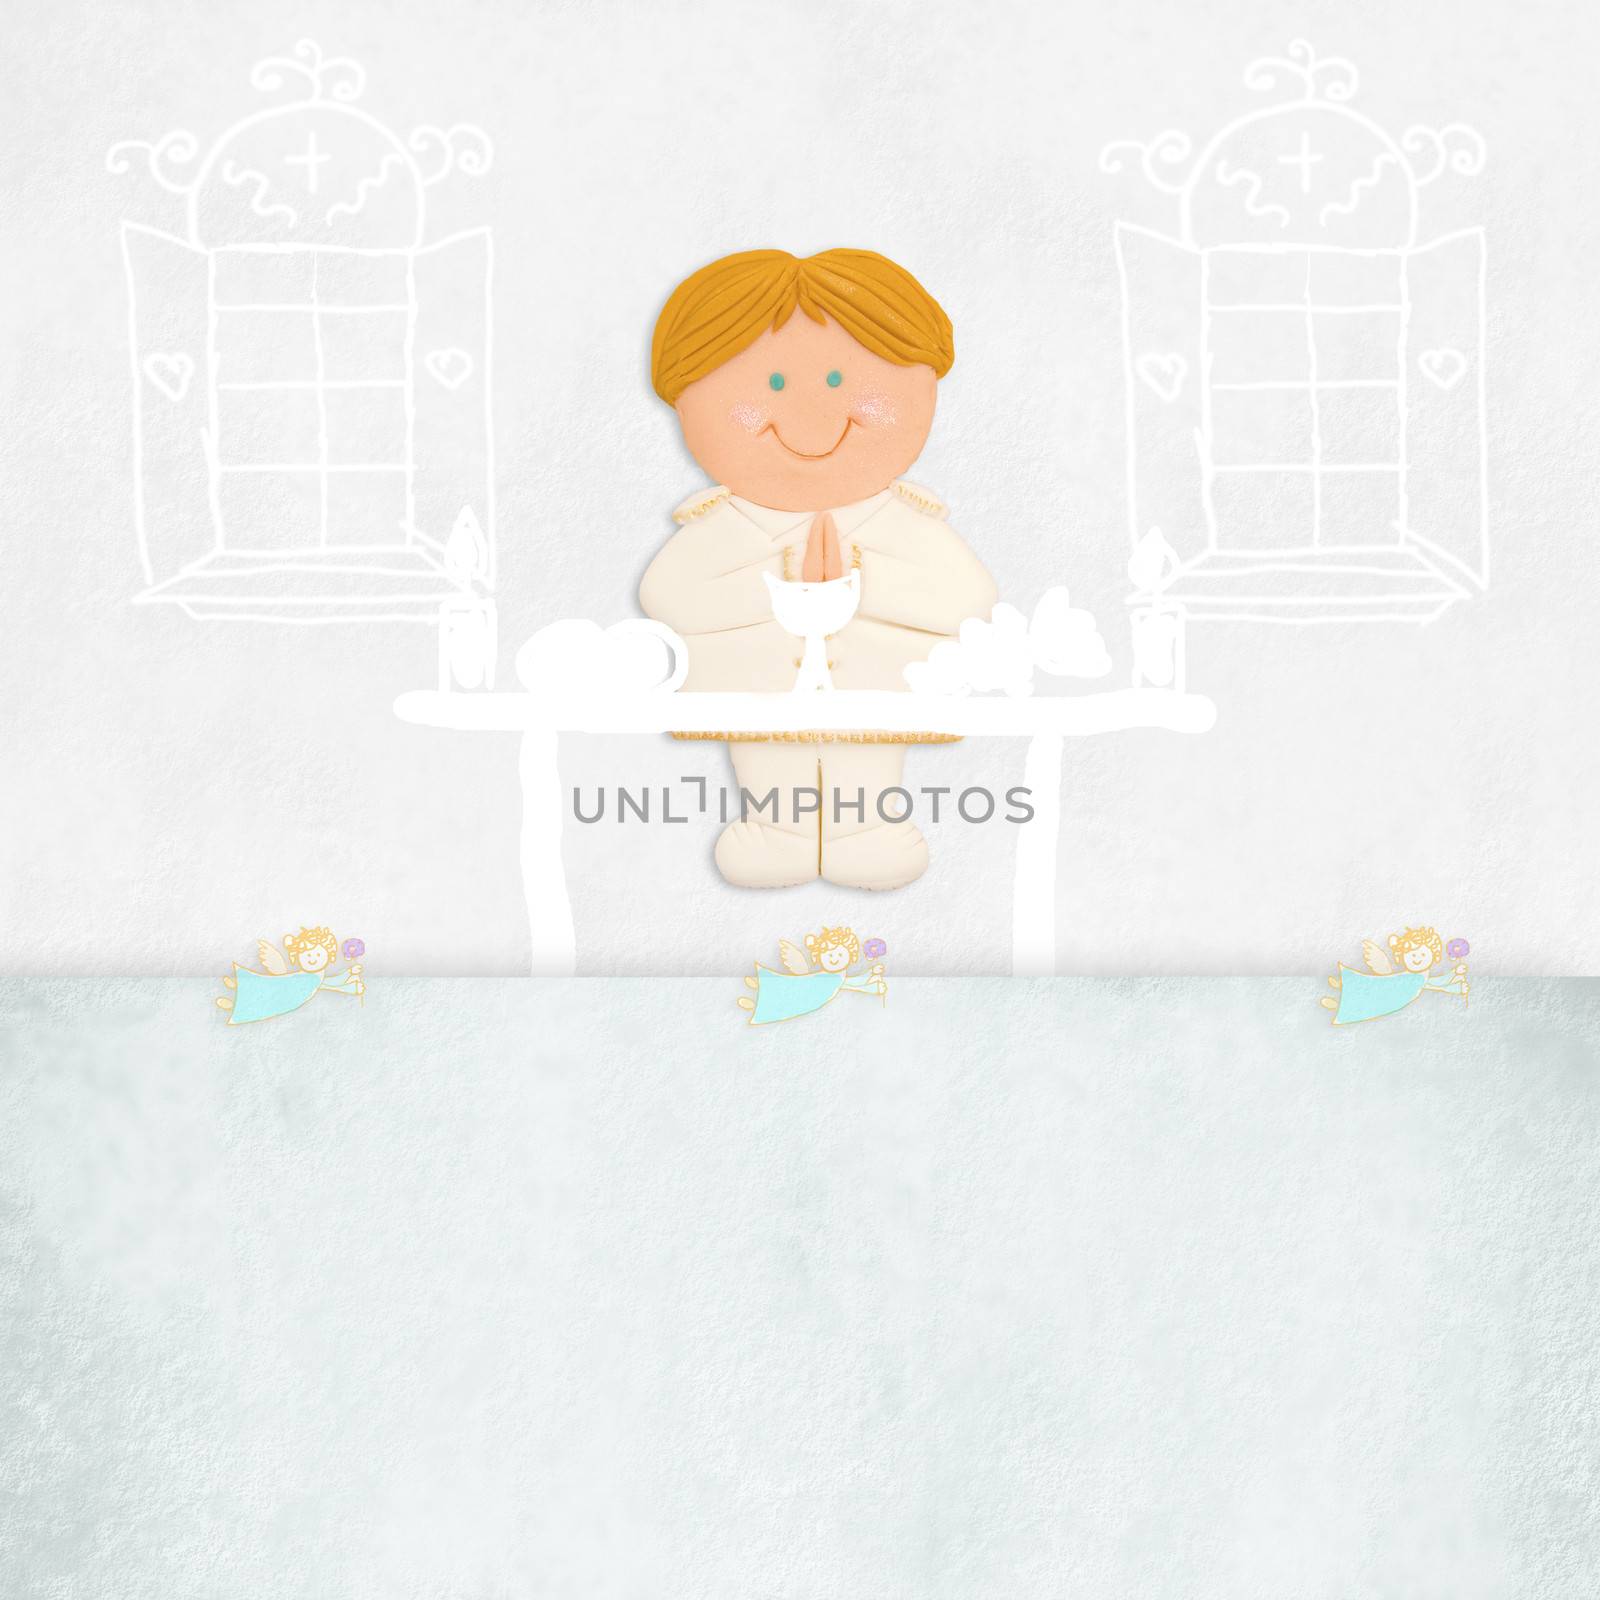 first communion invitation blond boy on the altar by Carche